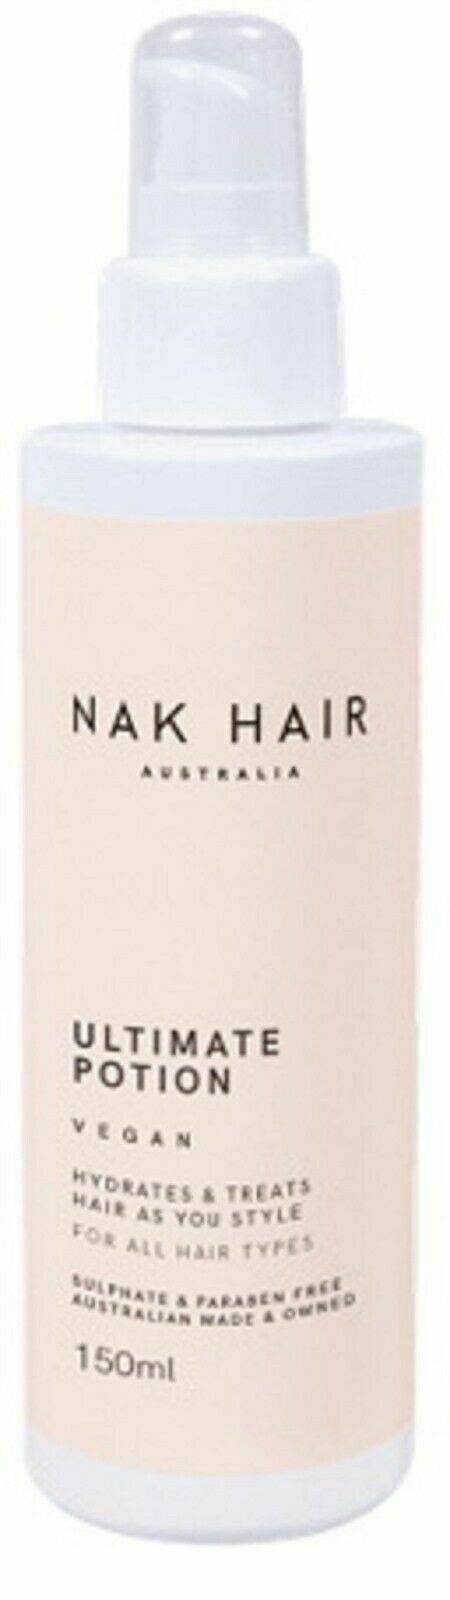 NAK Ultimate Potion 150ml Hydrates & Treats Hair as You Style Vegan Friendly - On Line Hair Depot